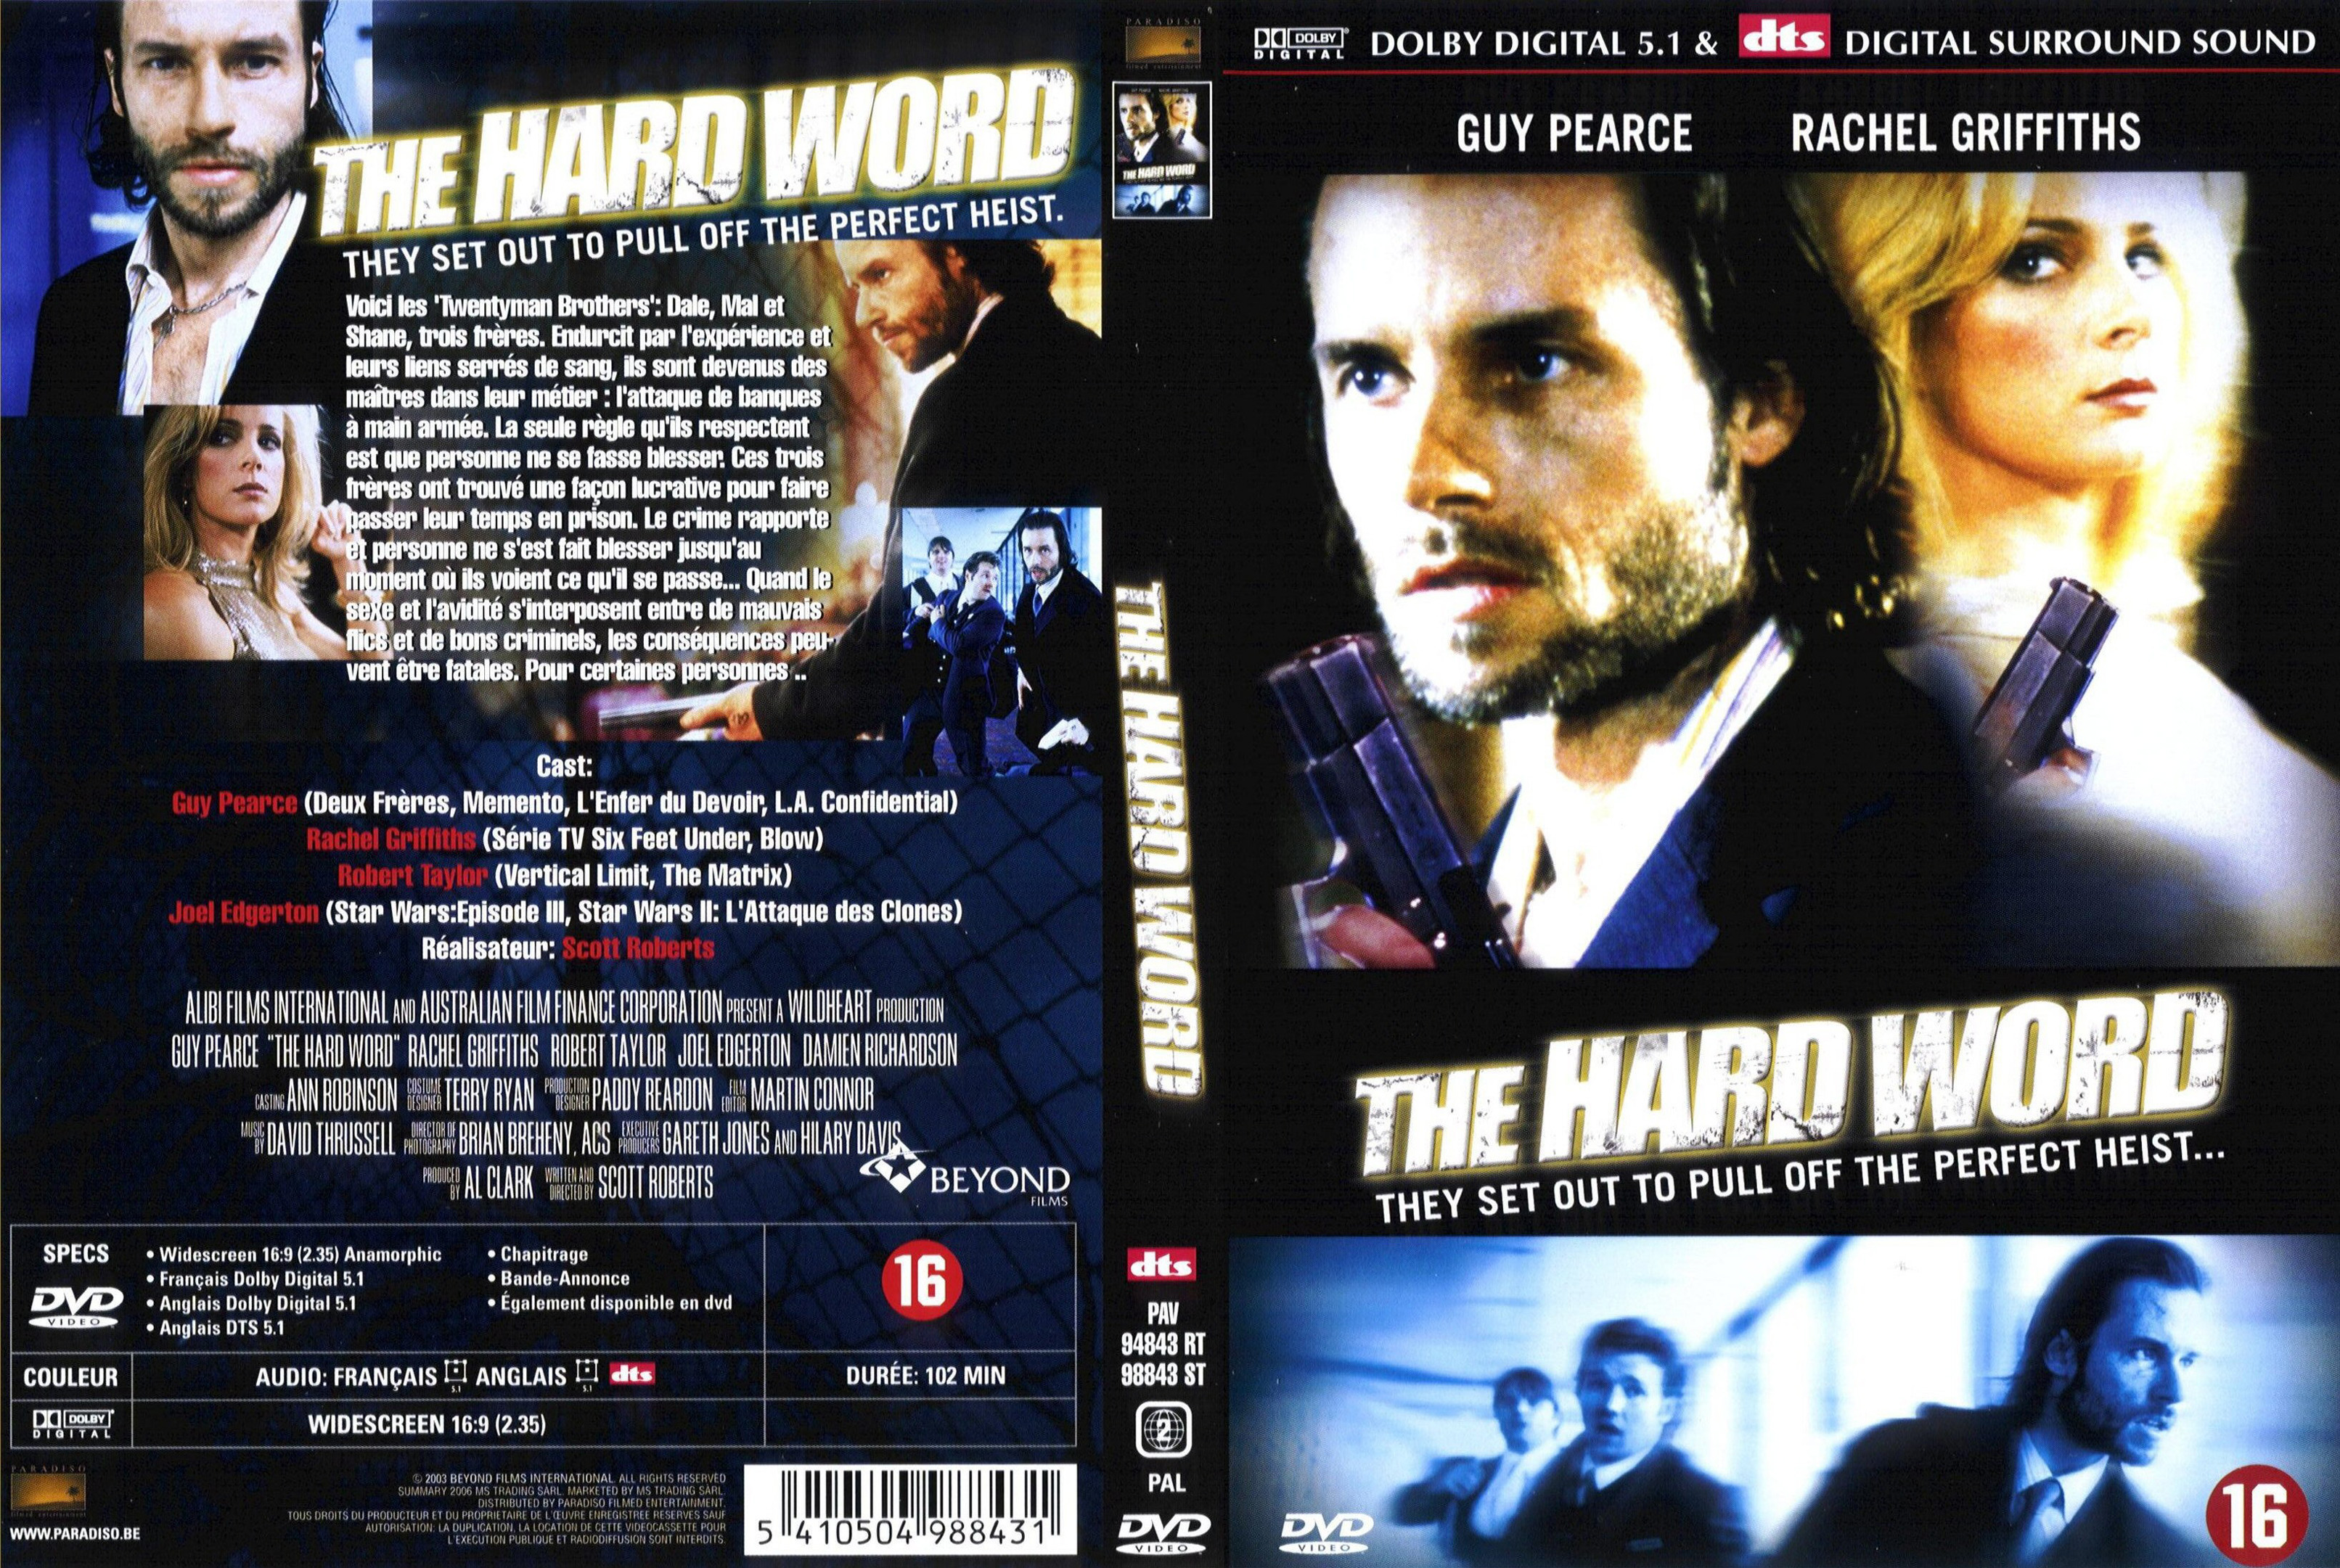 Jaquette DVD The hard word